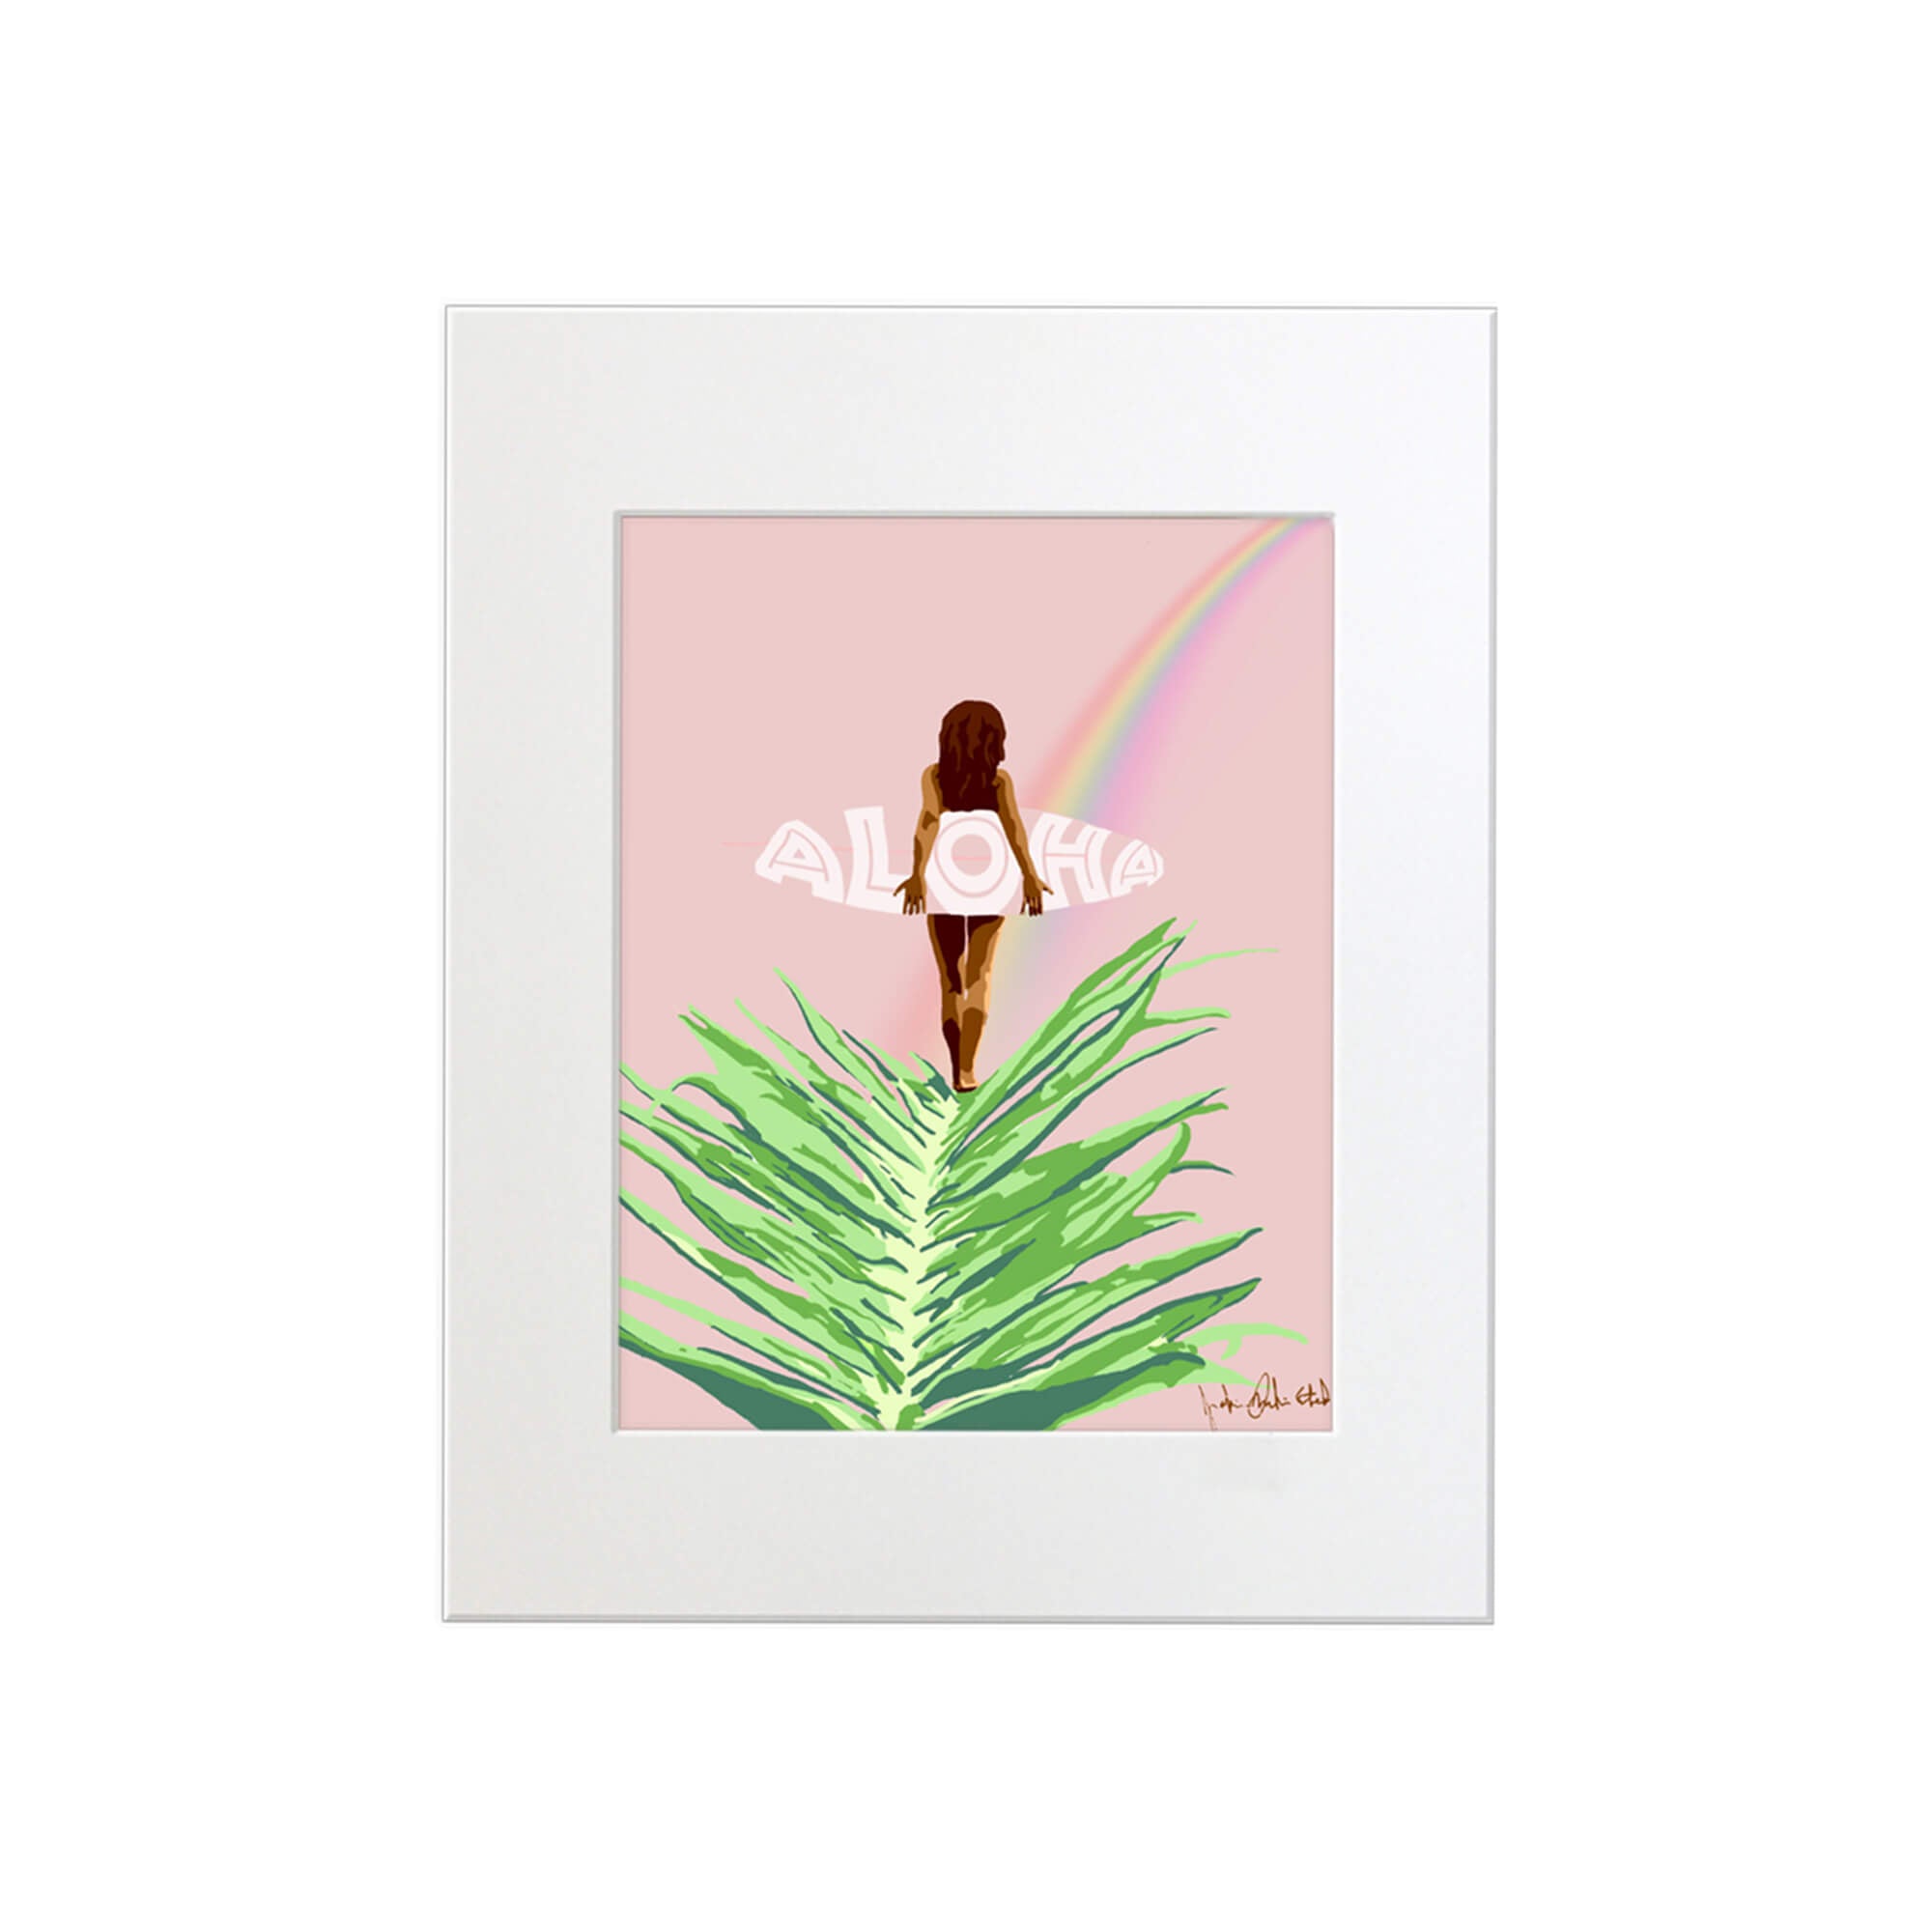 A matted art print featuring a woman holding a surfboard following a beautiful rainbow on a pastel pink background by Hawaii artist Jackie Eitel